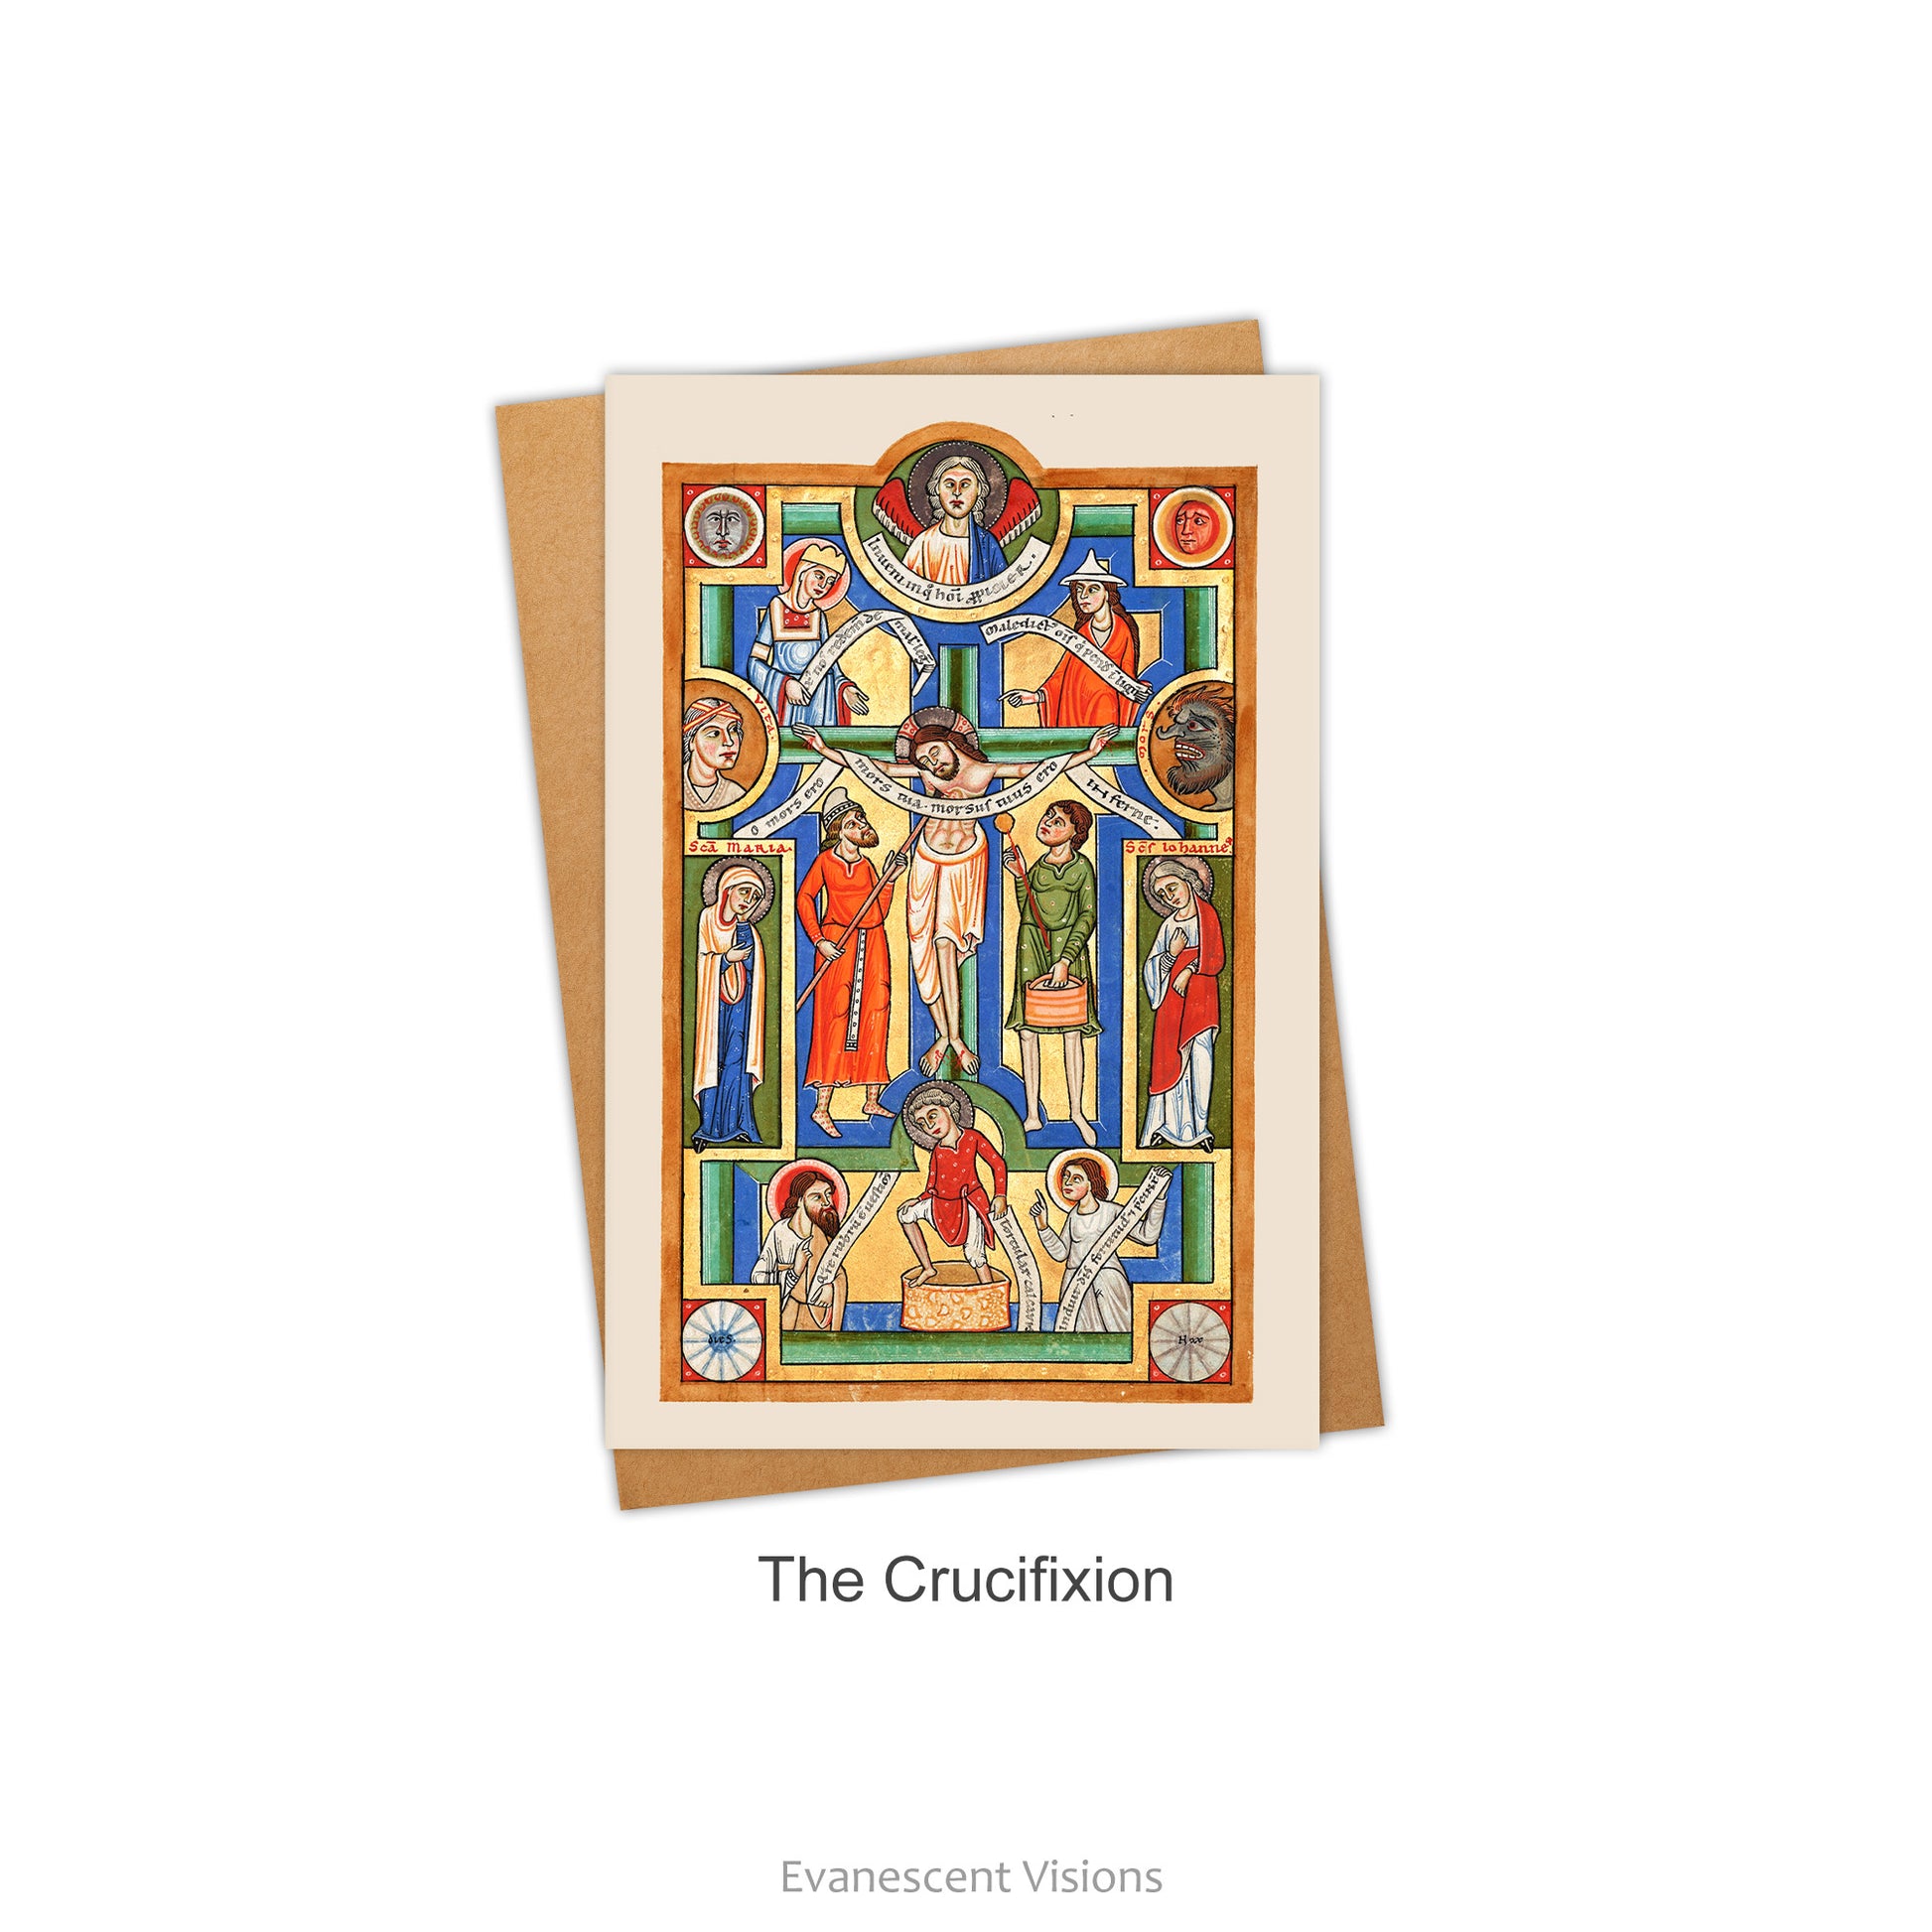 Card and envelope. Image on card is a Medieval Illumination from the Stammheim Missal, 'The Crucifixion.'